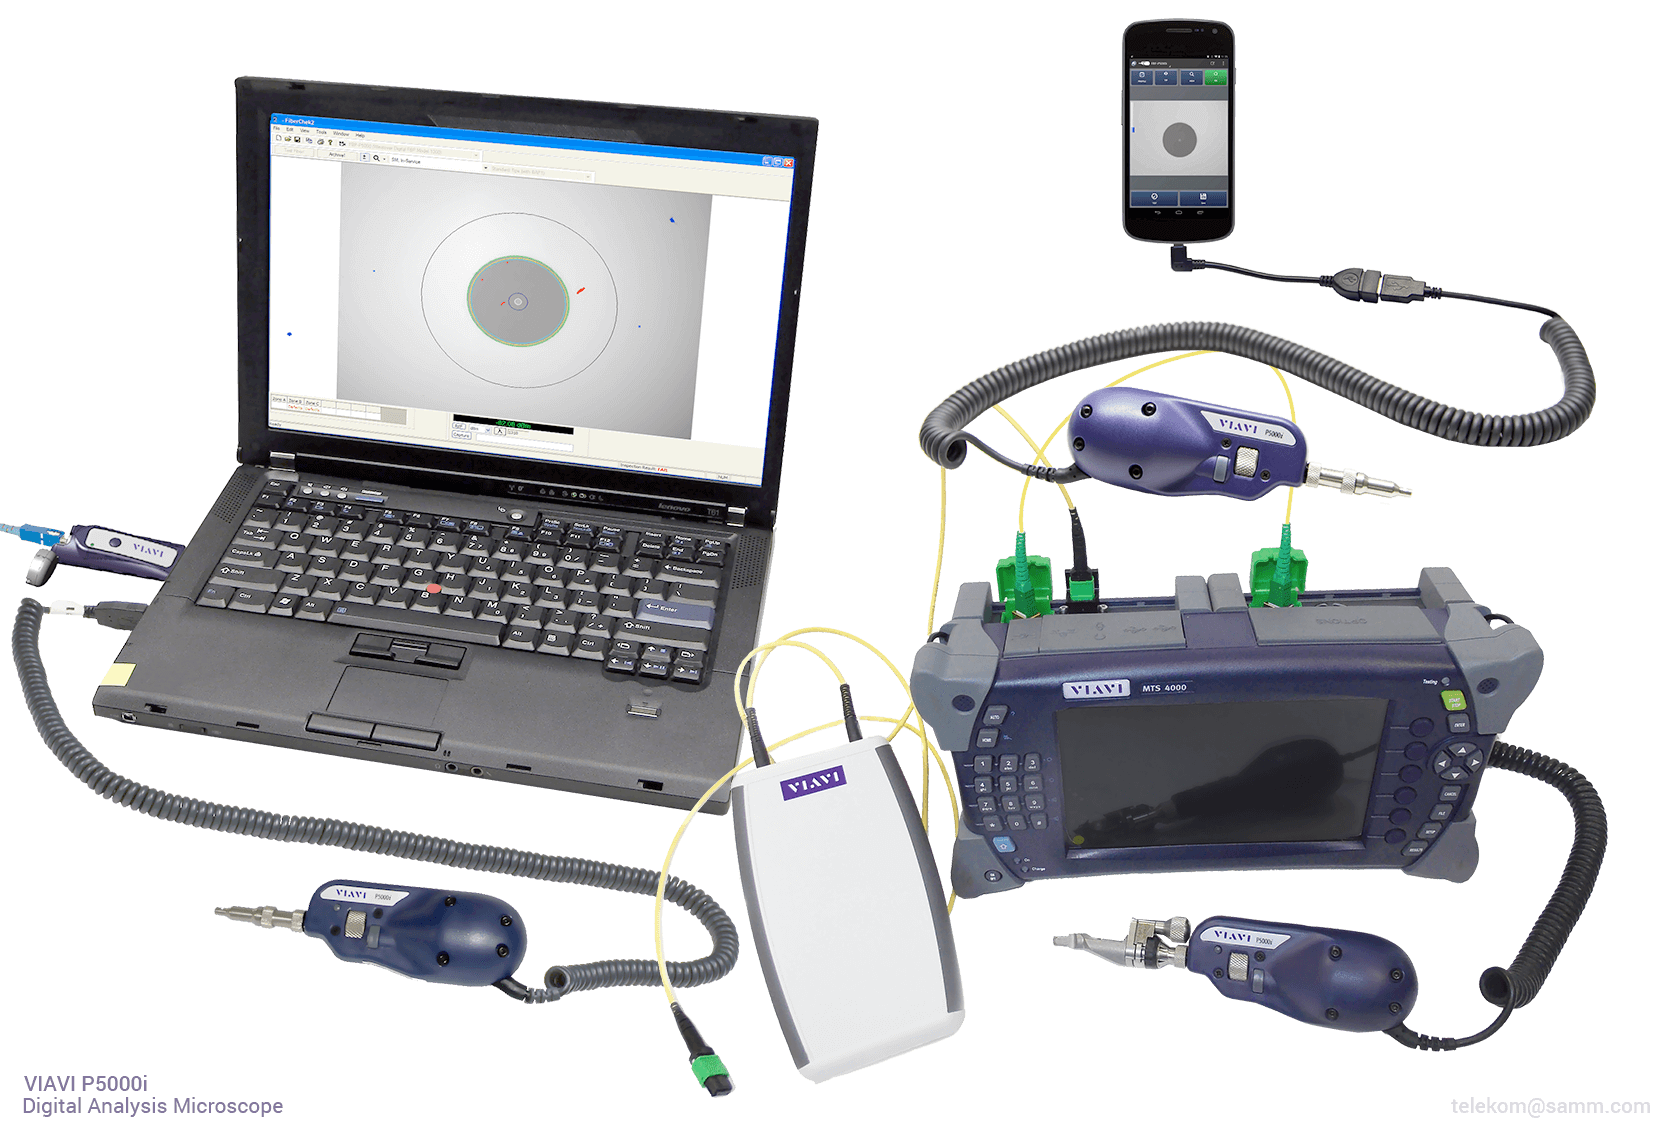 VIAVI P5000i | Connects via USB with multiple devices including Viavi tools, laptops/PCs, and Android mobile devices